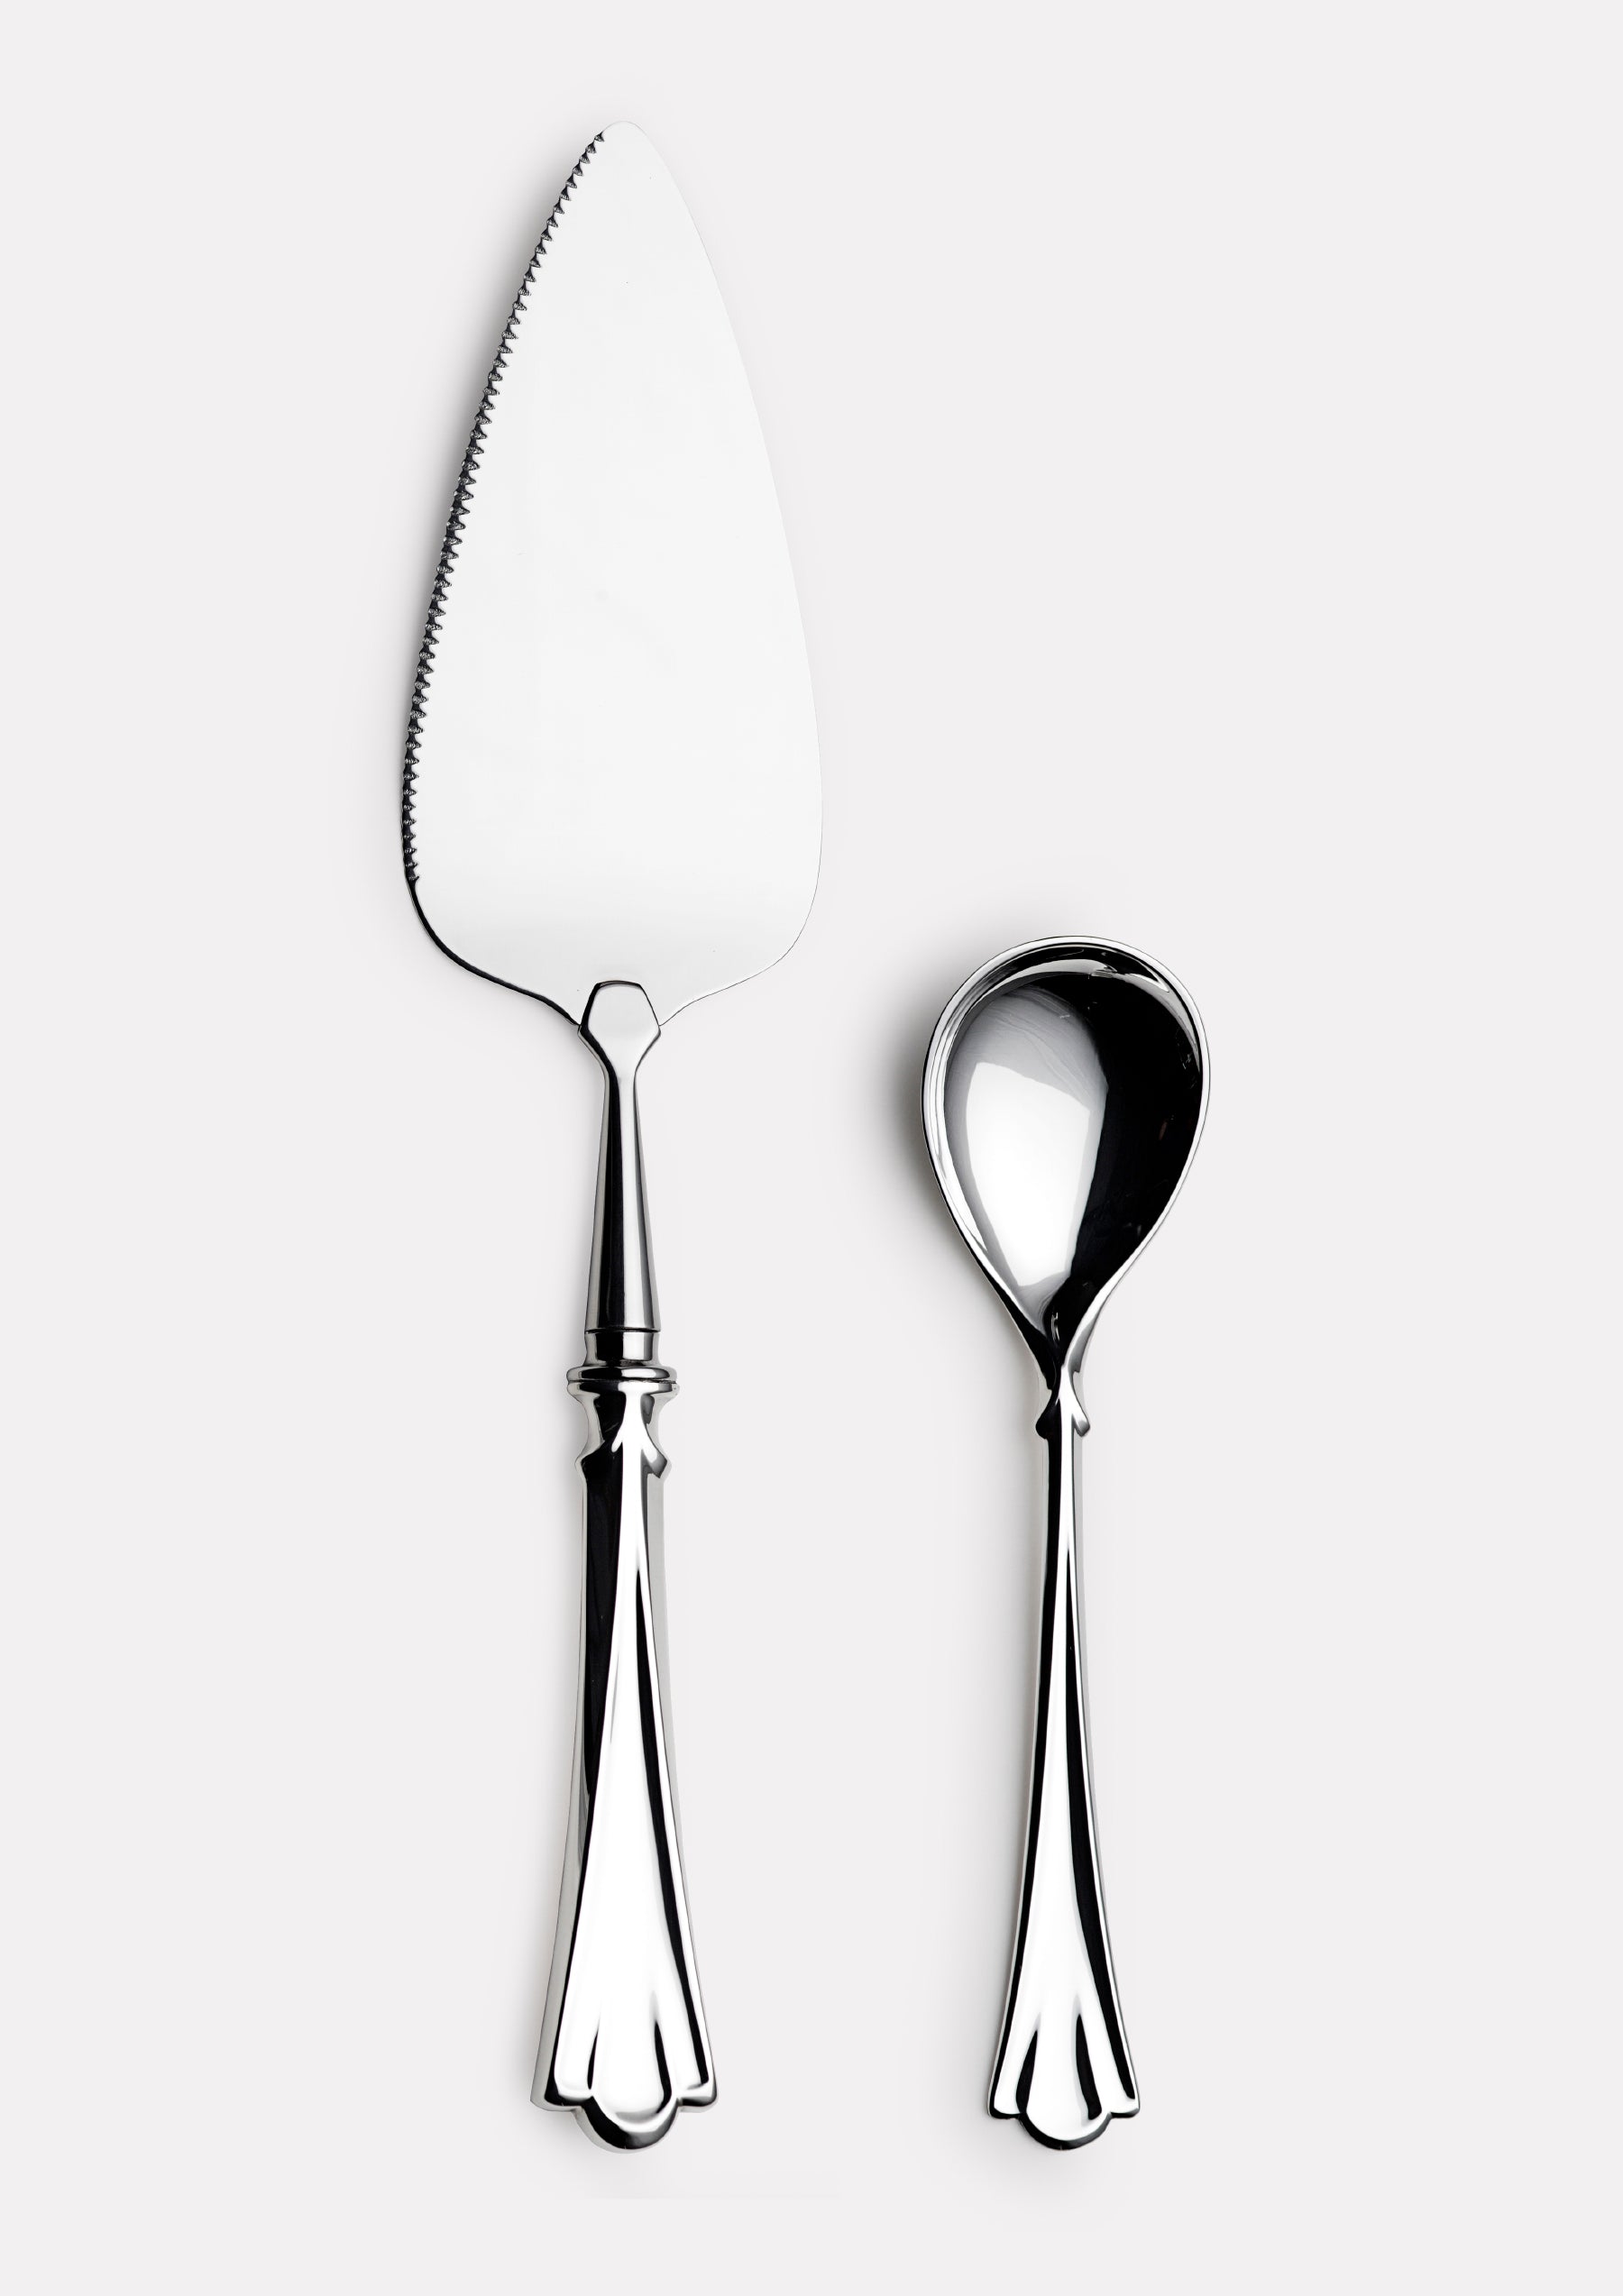 Lily pie spatula and jam spoon